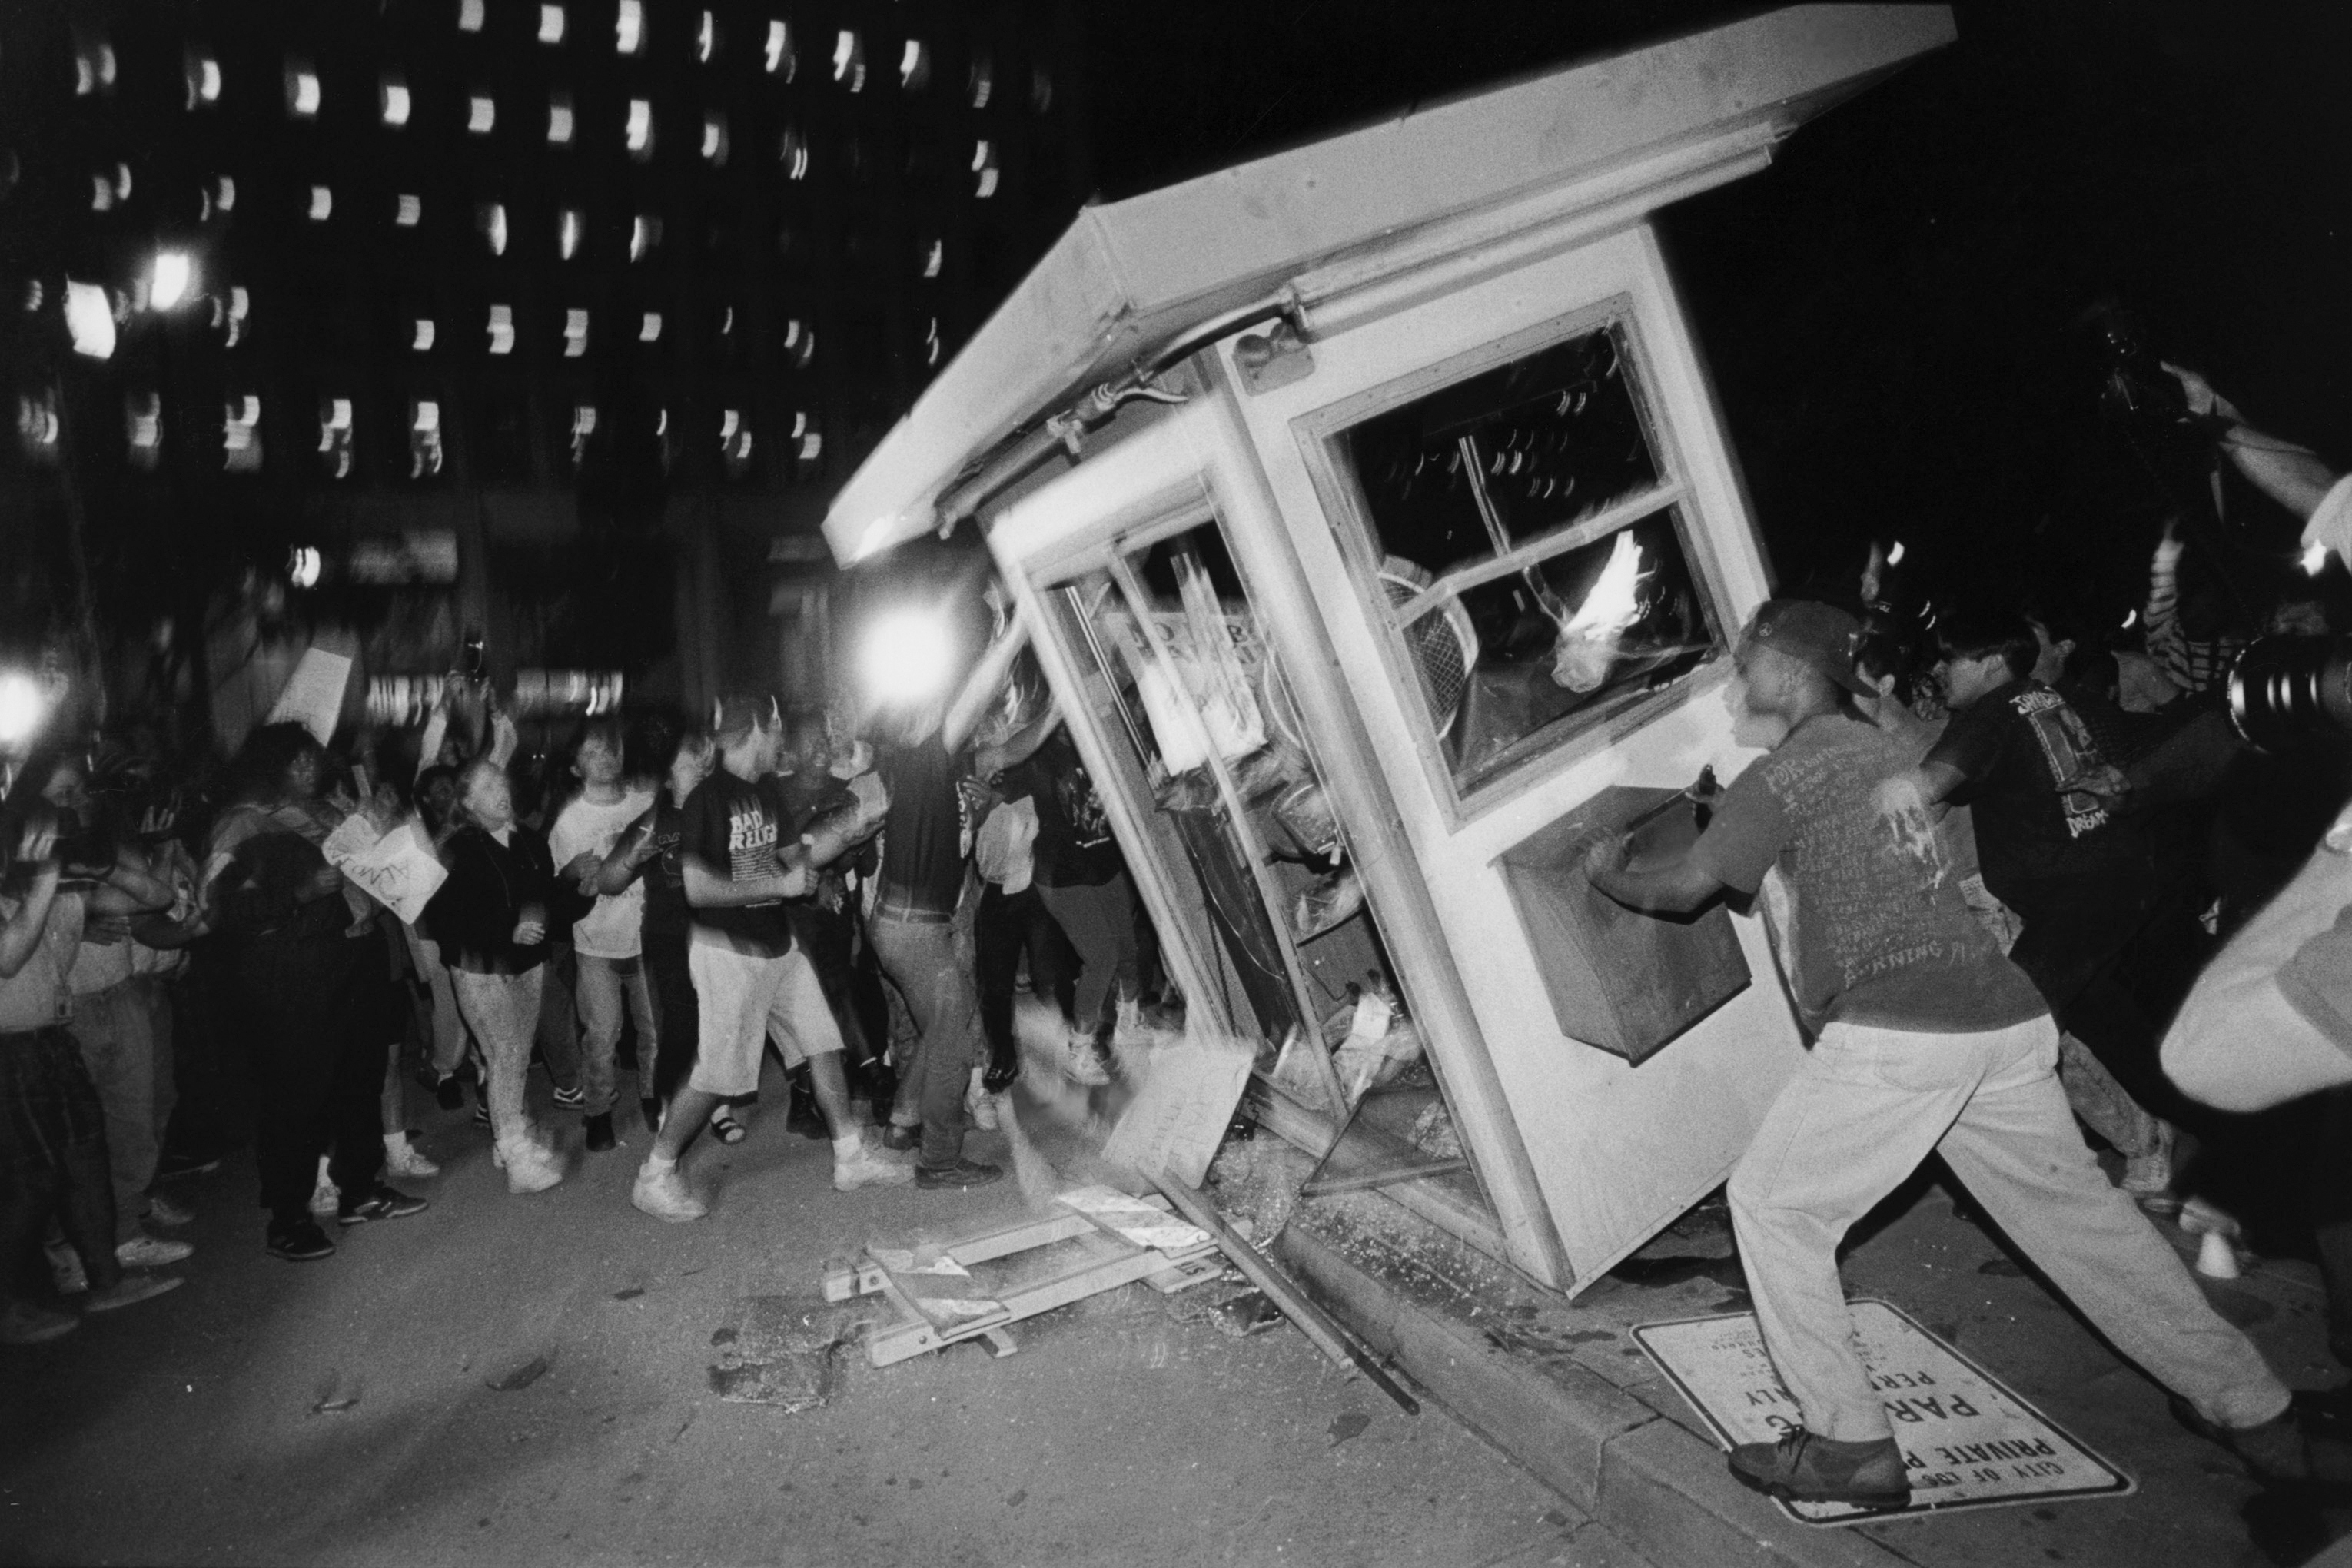 Rioters overturn a parking attendant booth at the LAPD Parker Center in downtown Los Angeles during the 1992 riots that swept the city for days after three of four police officers accused of the 1991 beating of Rodney King were cleared of all charges. The fourth officer was charged with use of excessive force. (Photo by Ted Soqui/Corbis via Getty Images)